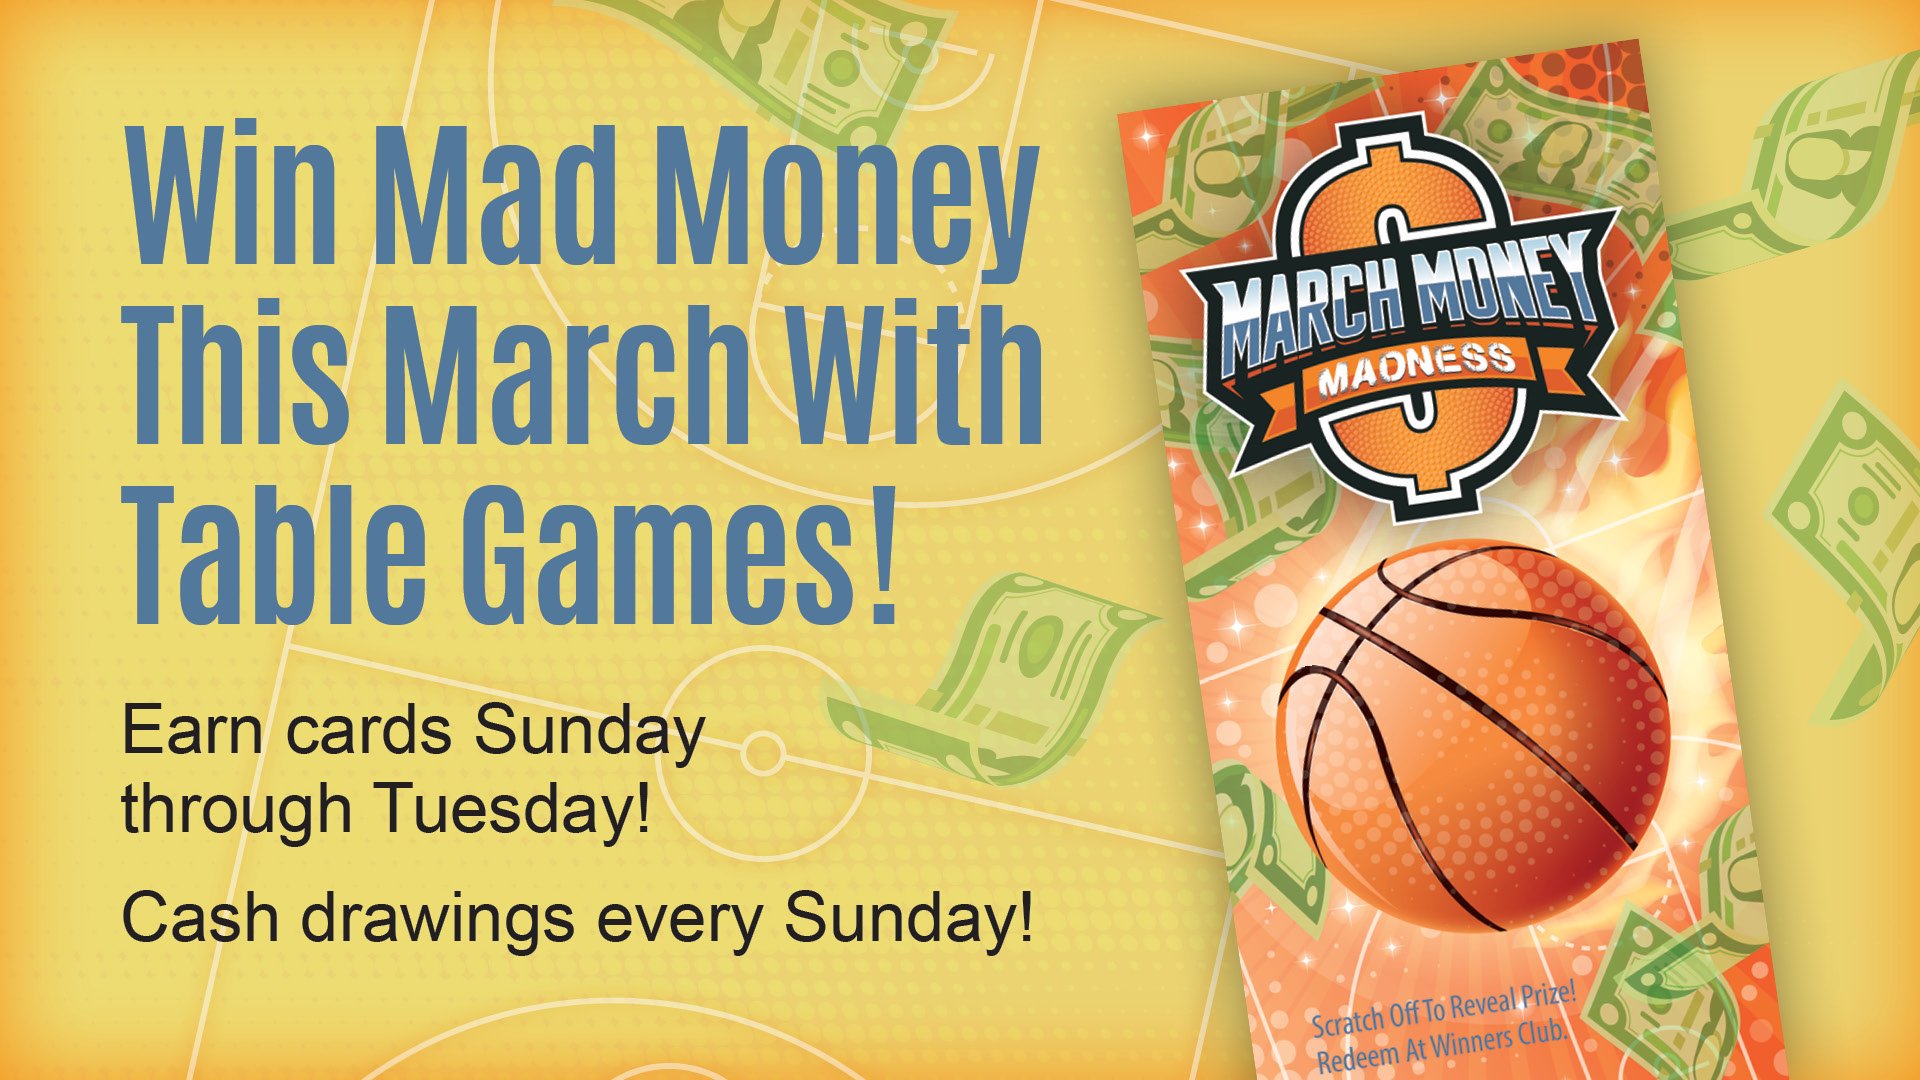 Play Table Games In March To Win Mad Money! | Nooksack Northwood Casino